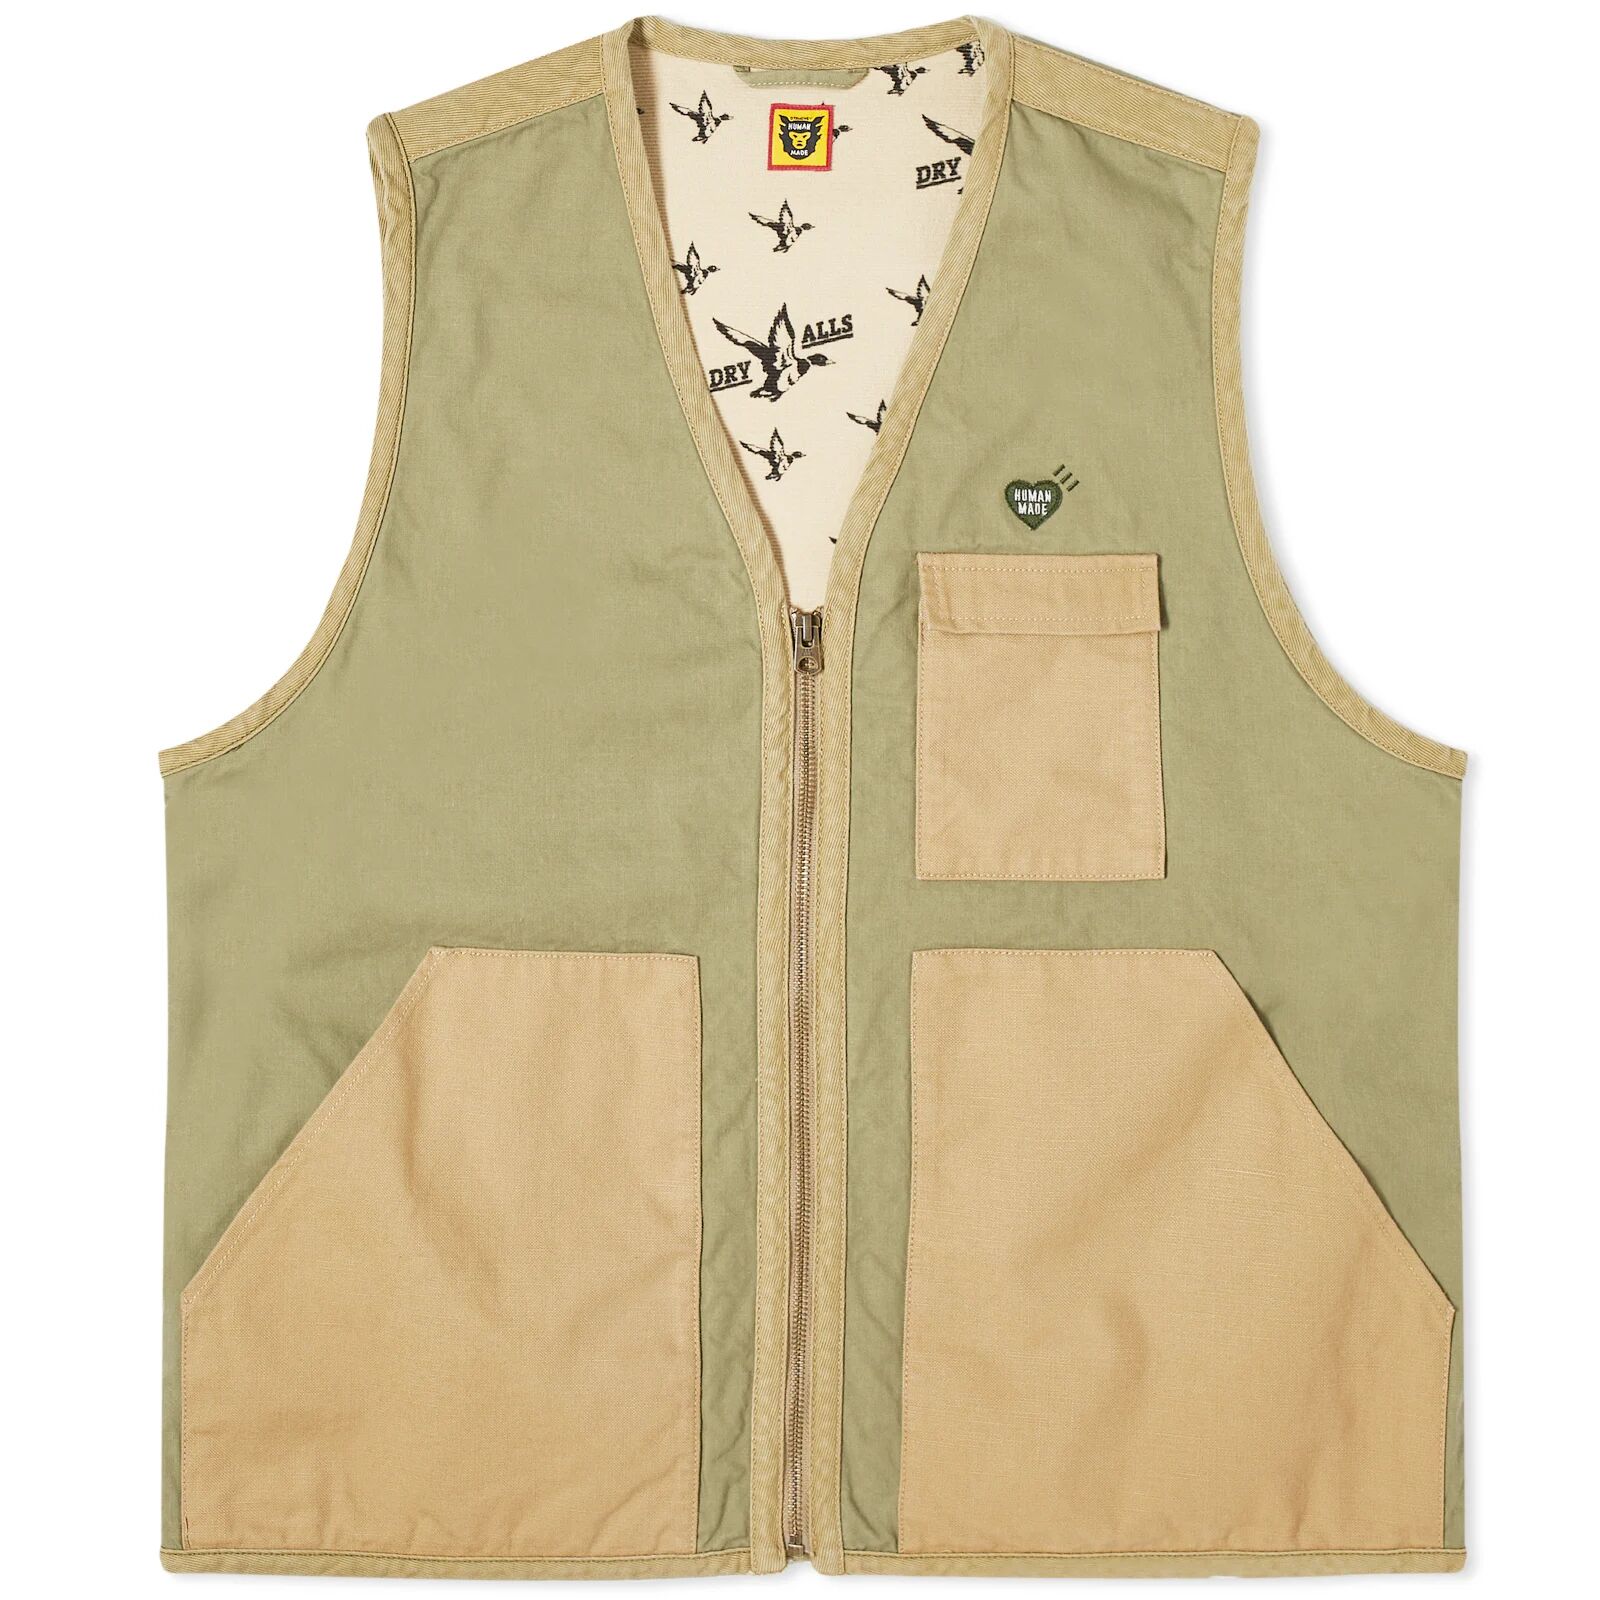 Human Made Men's Hunting Vest in Olive Drab, Size Large